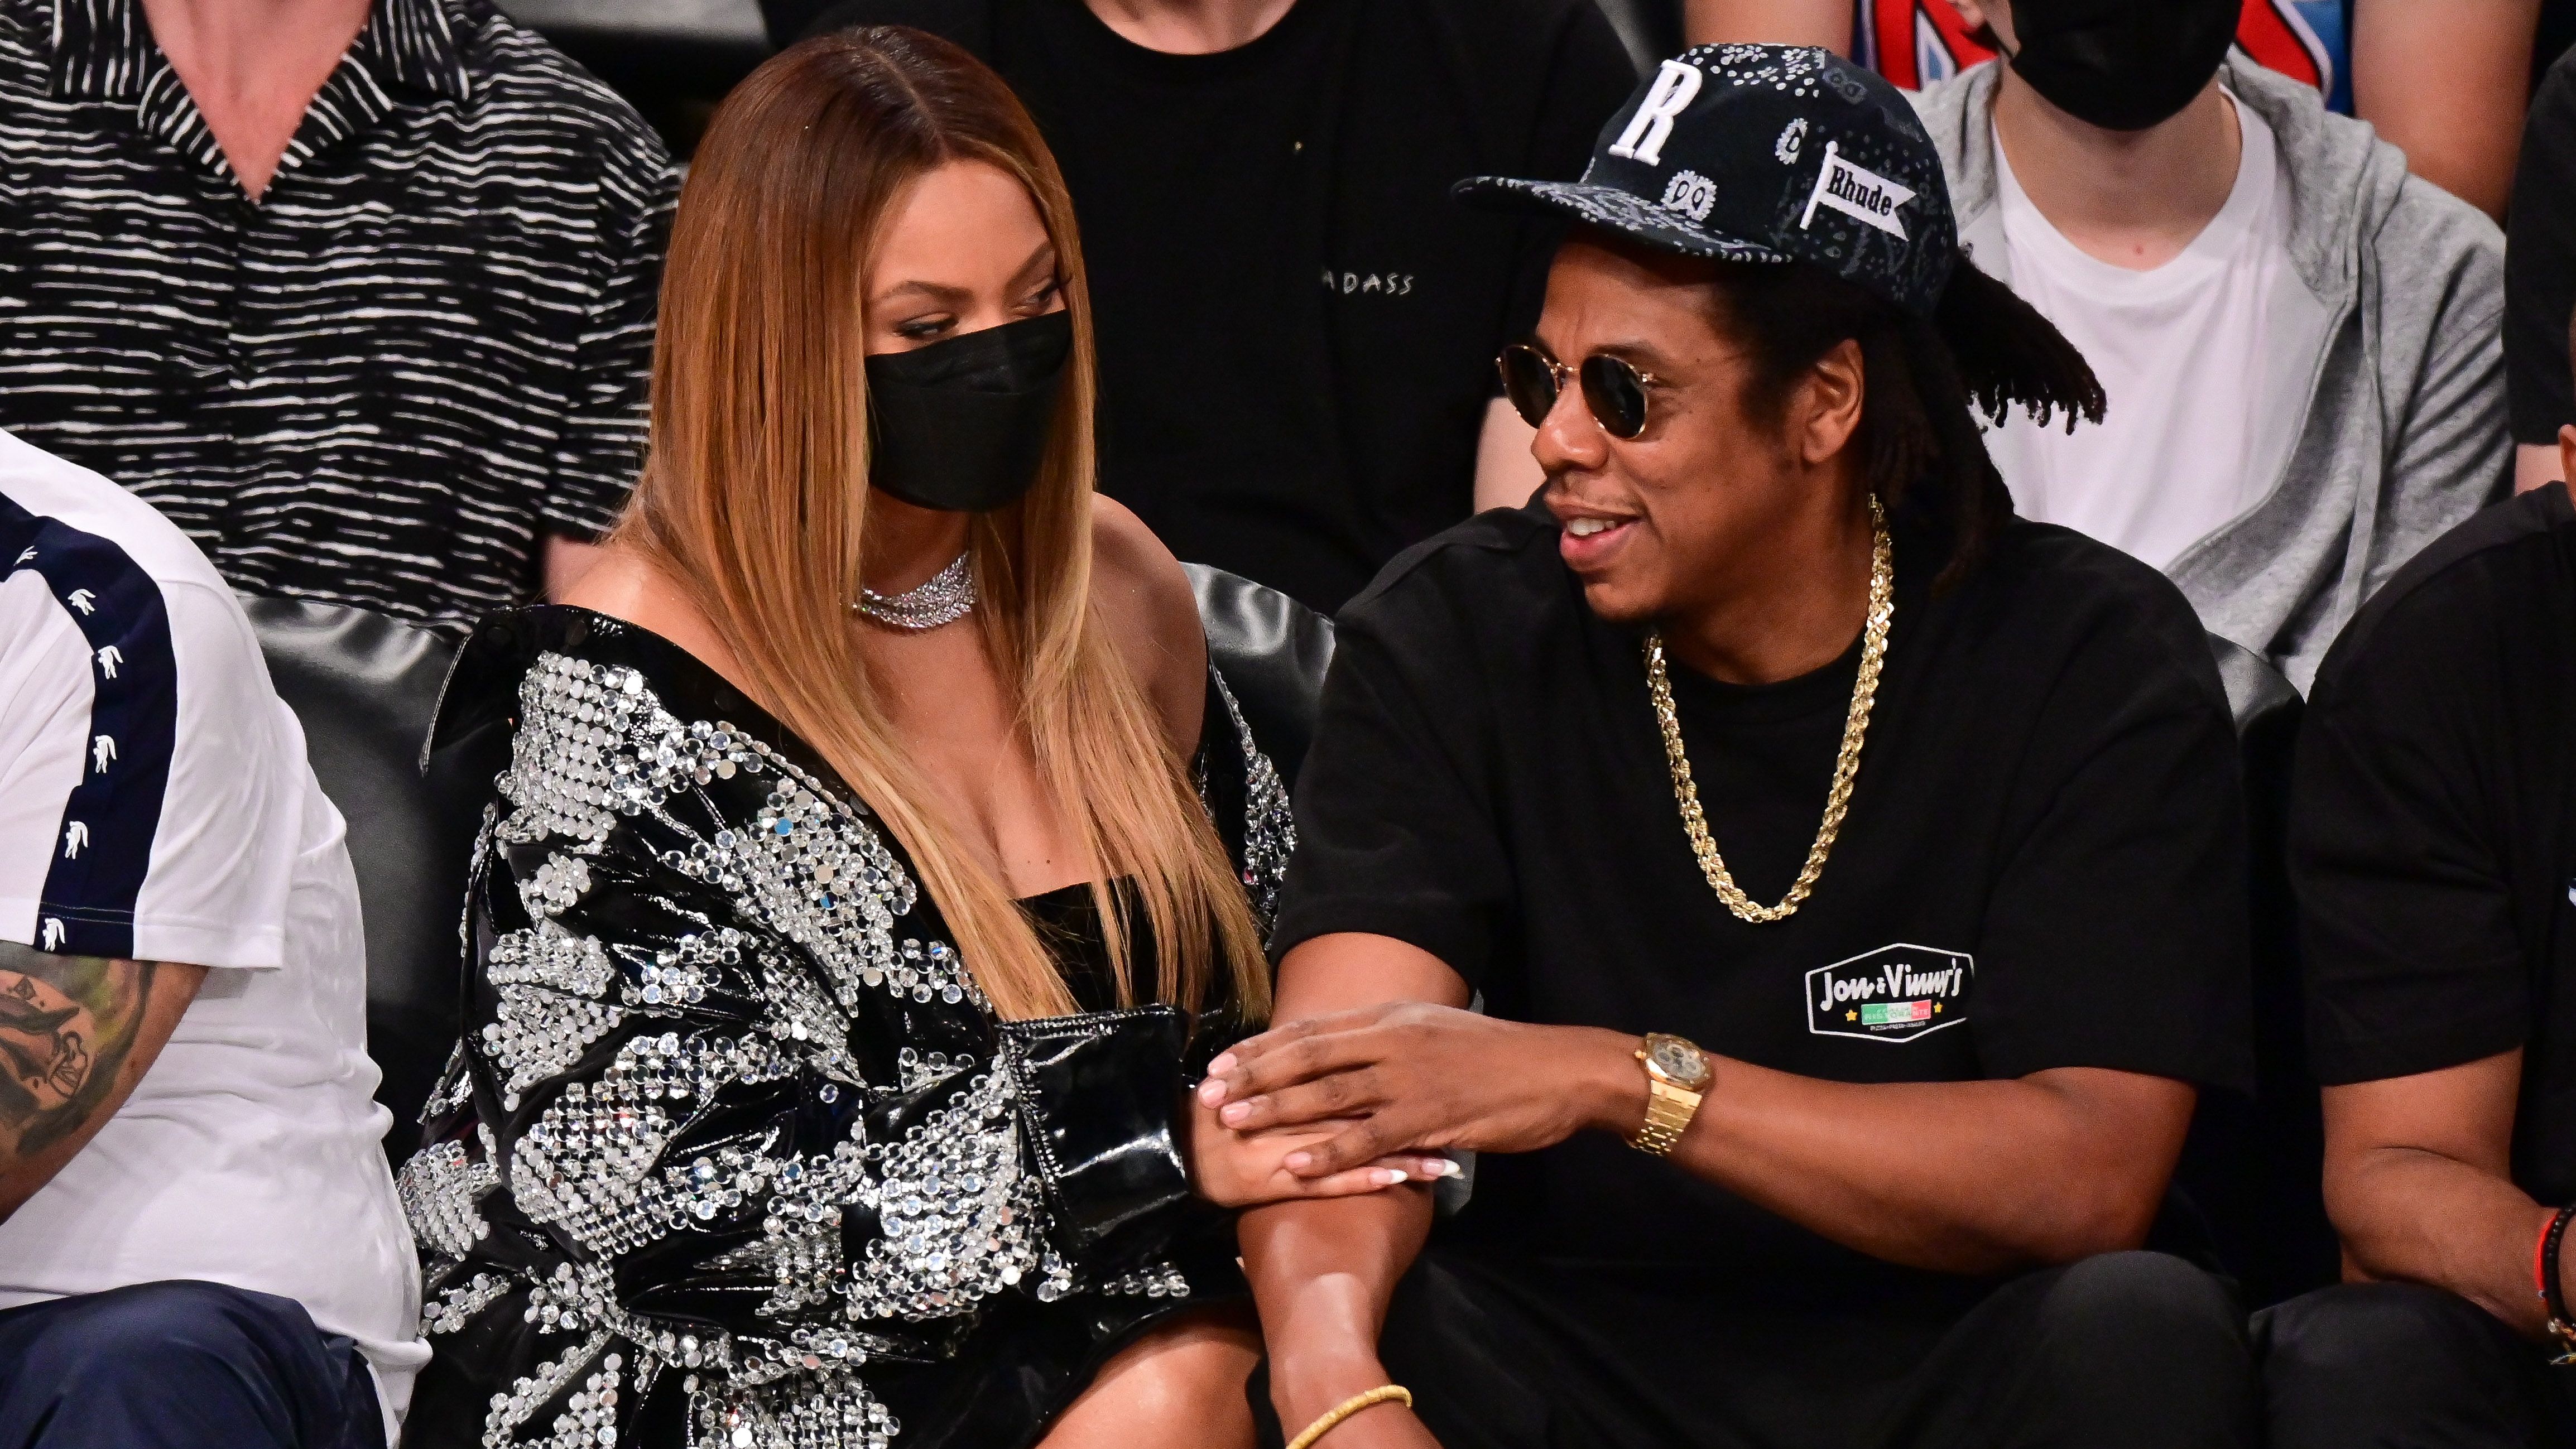 In Chic Jay-Z Dot a Polka Mini Beyoncé London On Date With Wore Dress